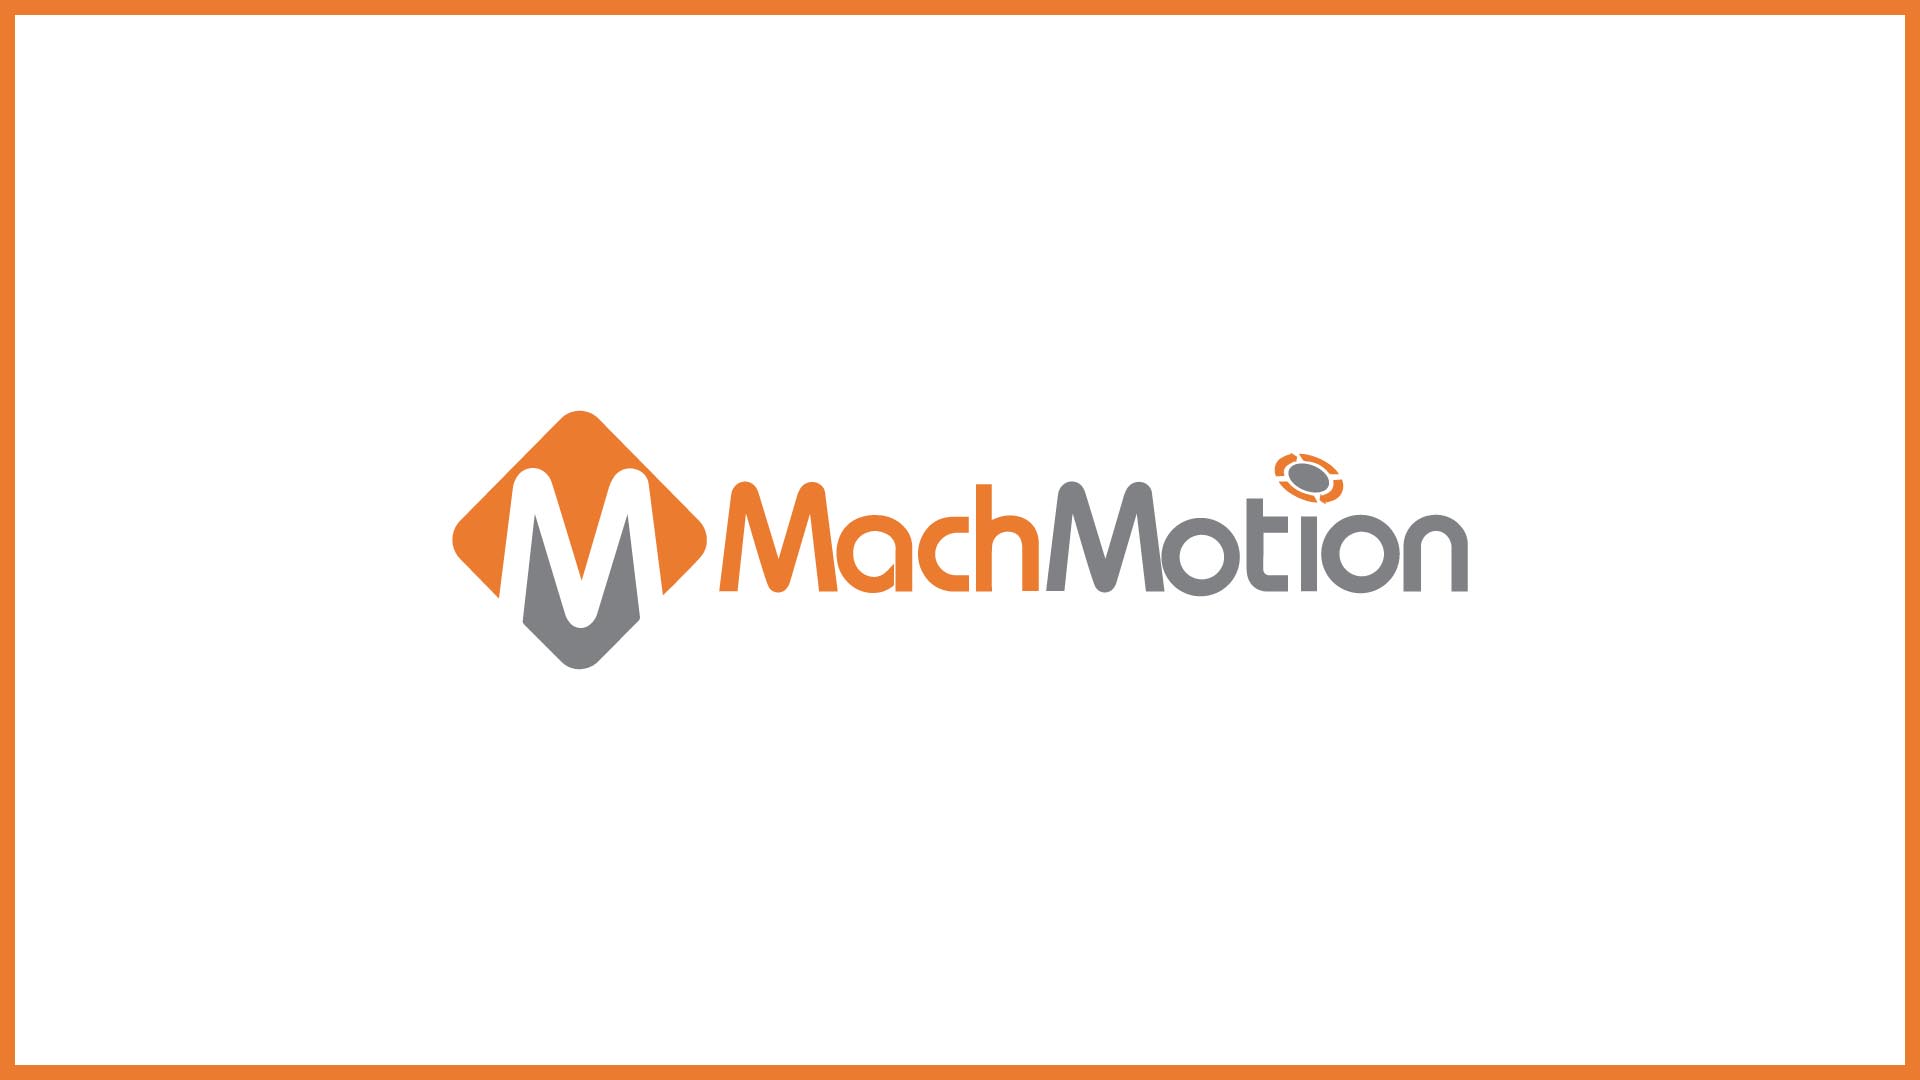 "MACHMOTION HAS BEEN A BLESSING TO WORK WITH"